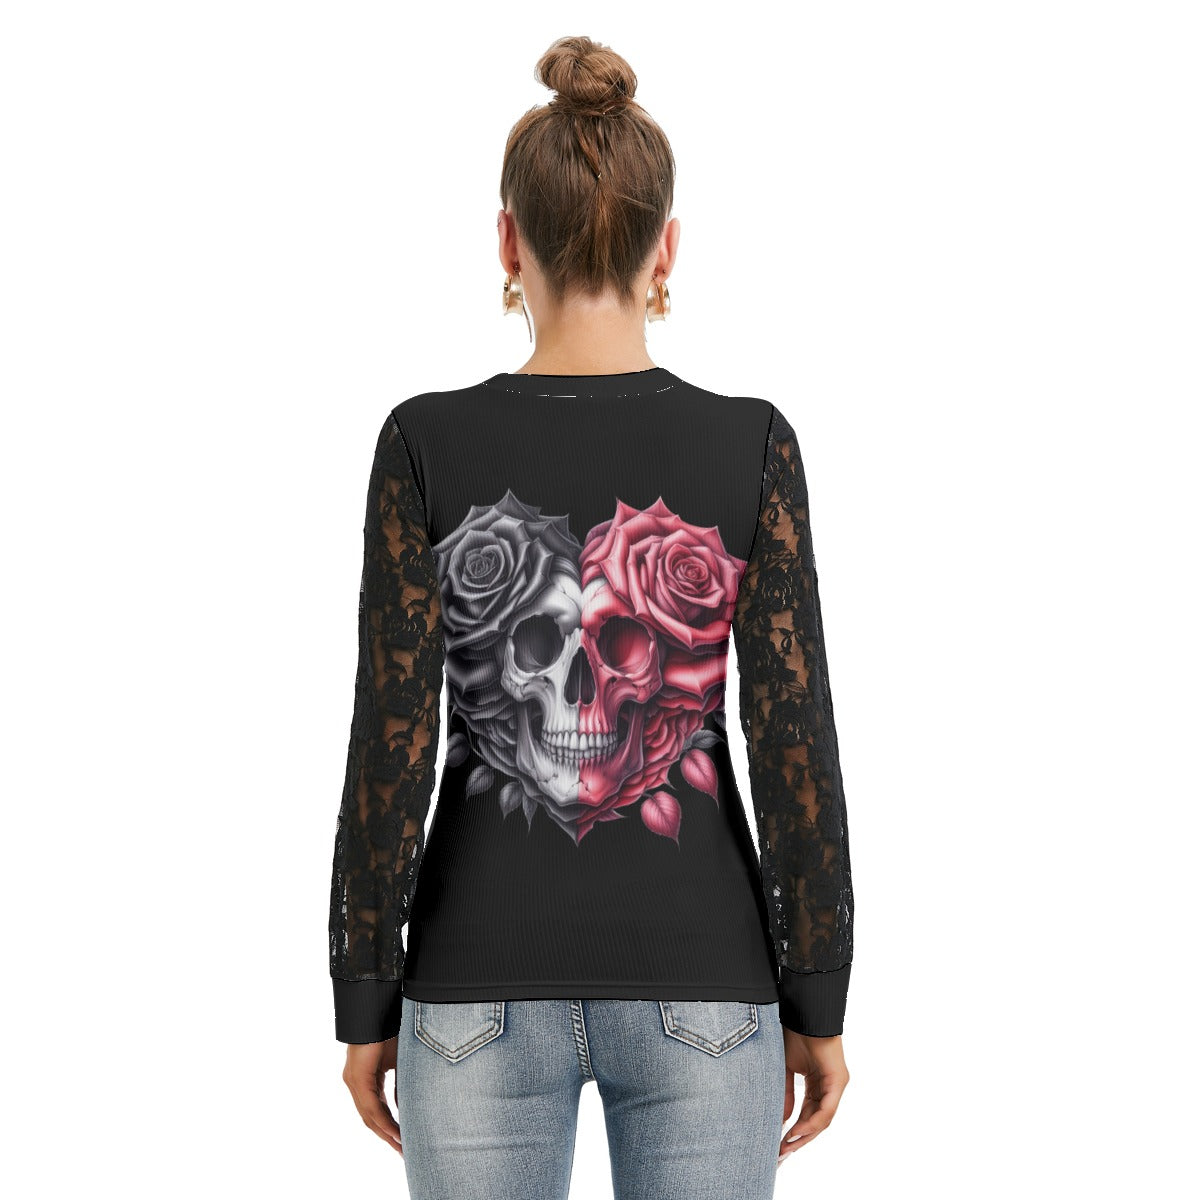 Skull And Rose Heart T-shirt And Sleeve With Black Lace